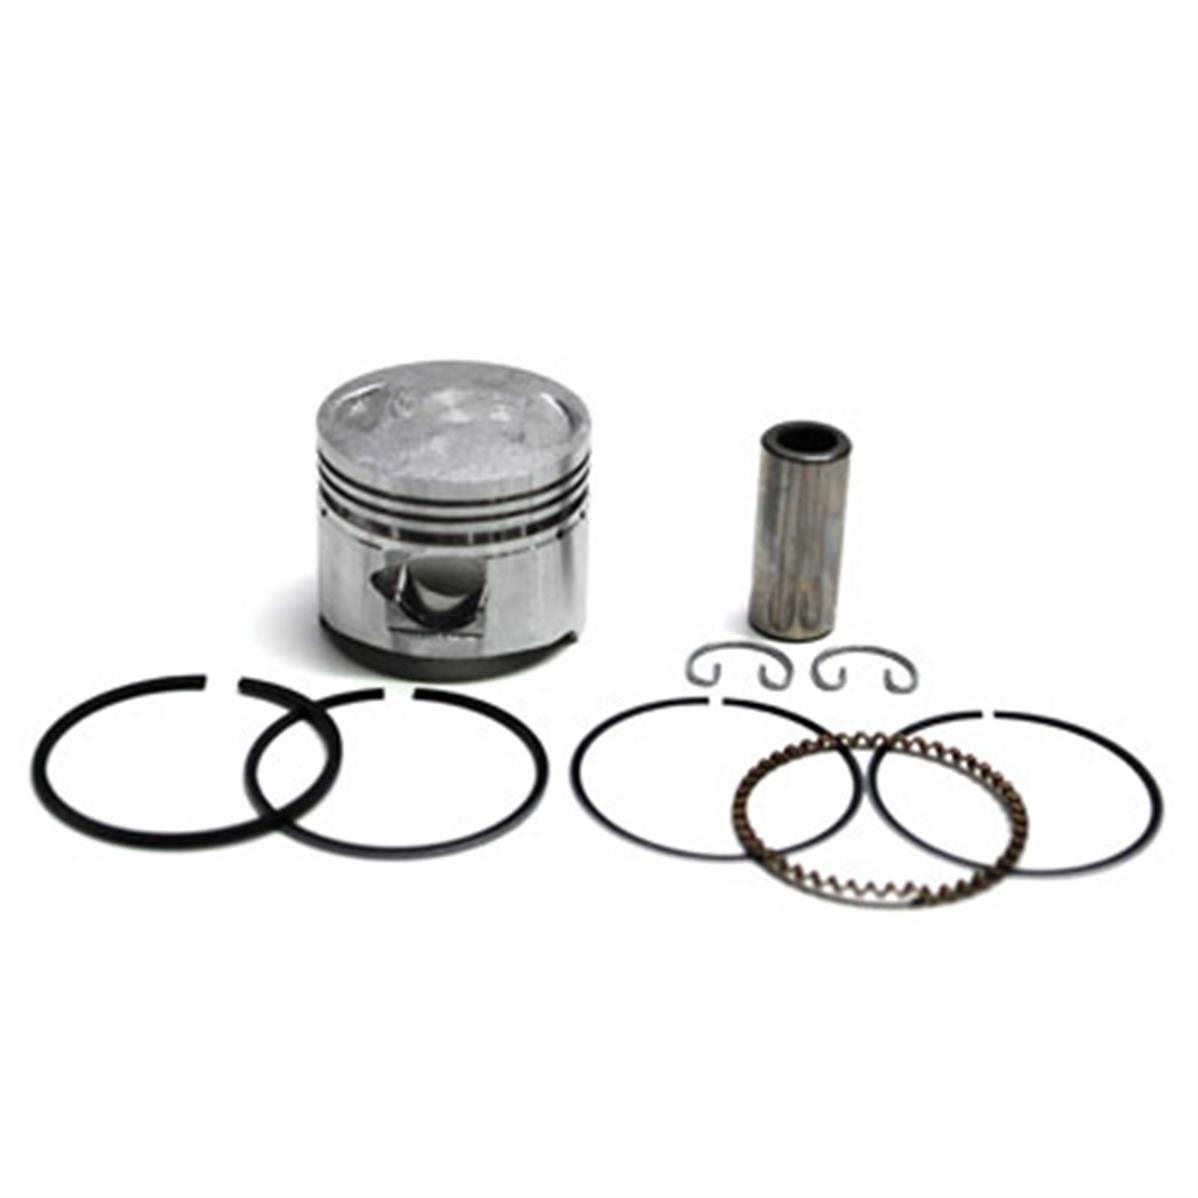 GY6 PISTON POUR SCOOTER 50 CM3 4 TEMPS CHINOIS TYPE 139 QMB 